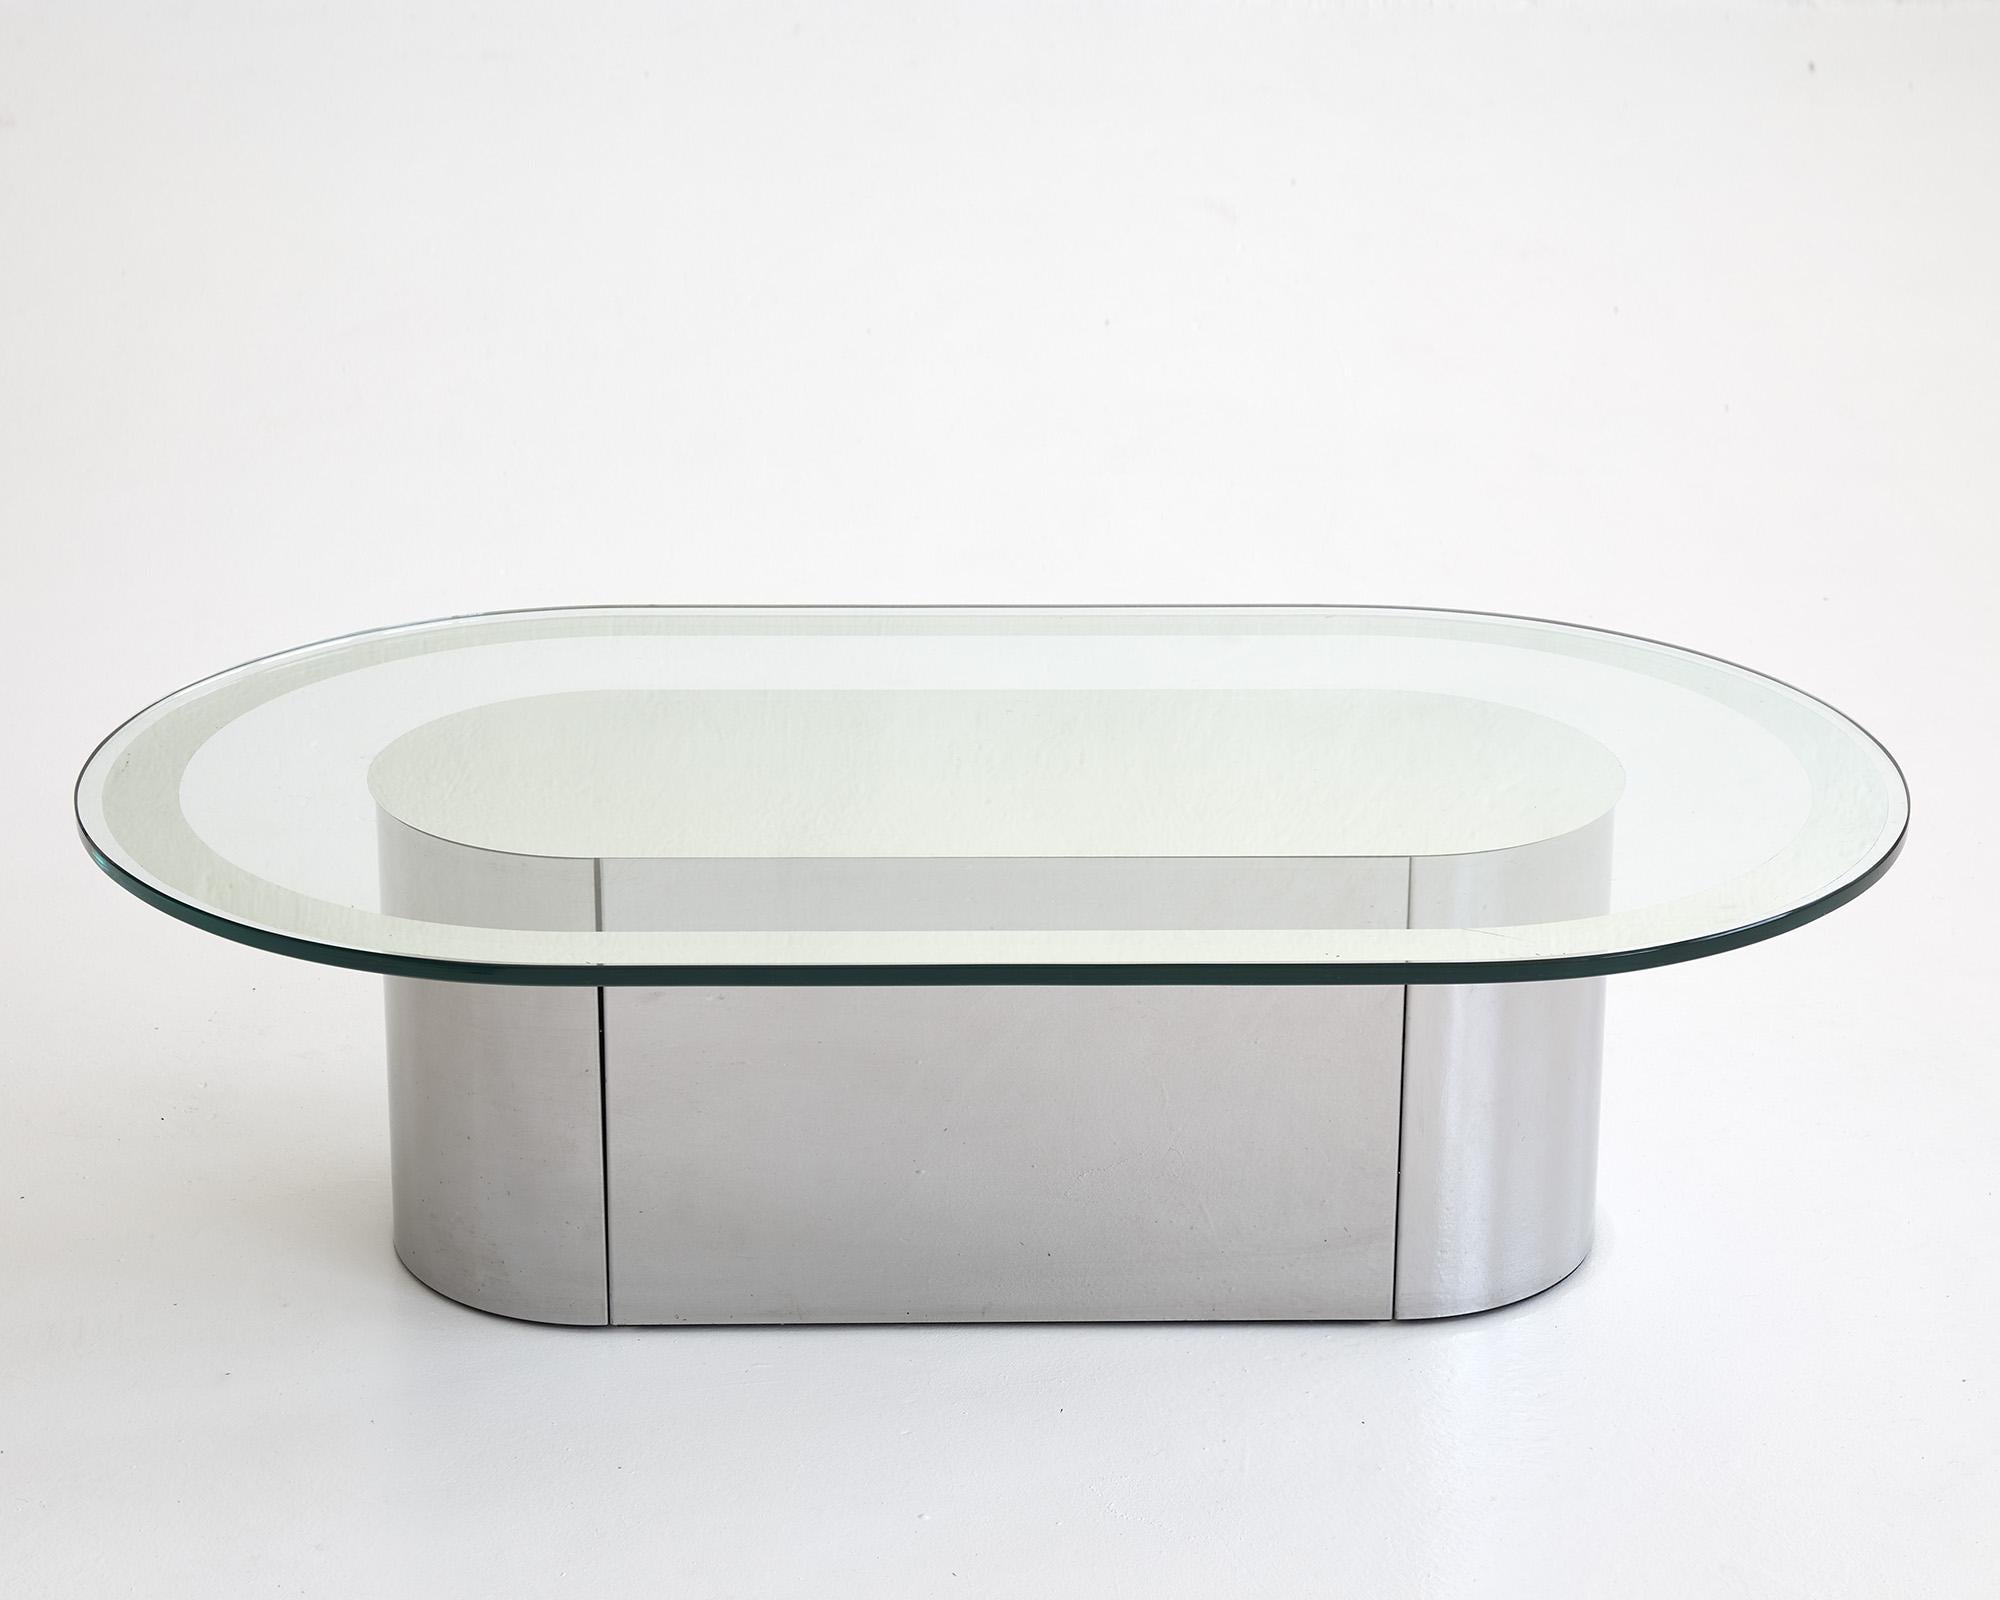 Very stylish and high quality coffee table probably made in Italy around 1970.

The oval glass top features an inlaid curved pattern composed of two lines which create an interesting optical effect.

The mirror polished metal base matches the shape